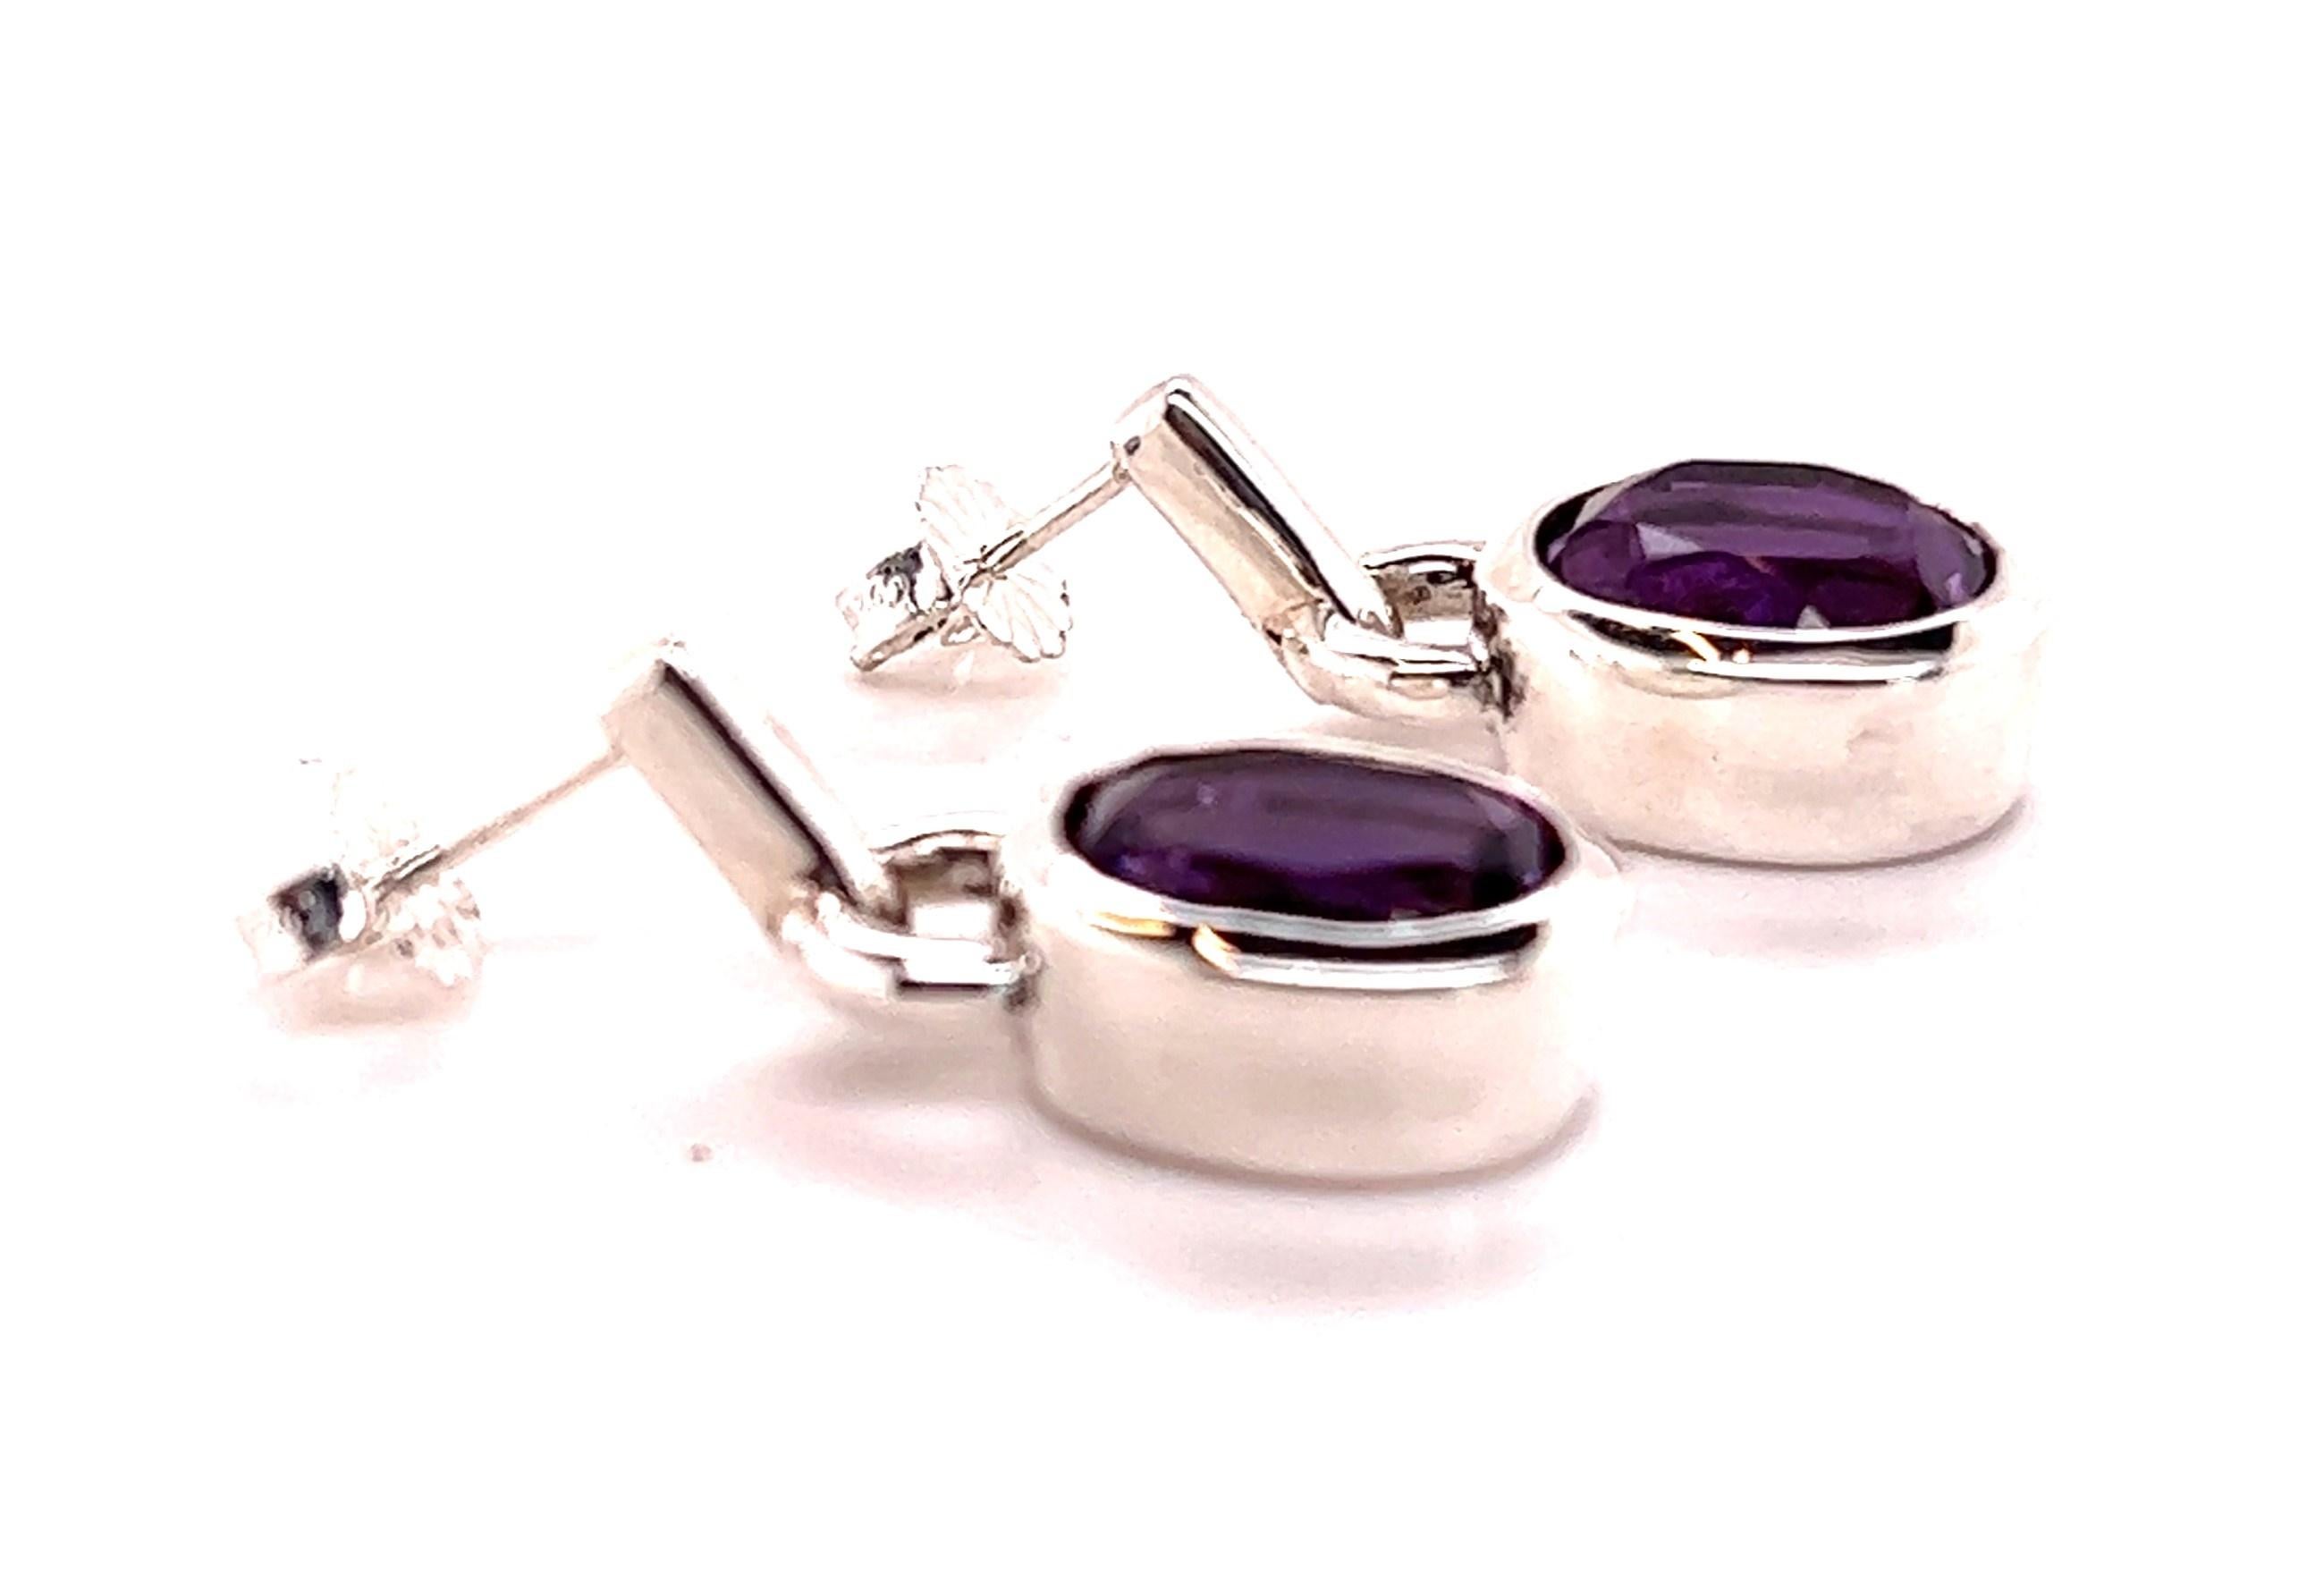 Are you looking for earrings with a big look without paying an arm and a leg? These amethyst earrings fit that bill nicely!

The earrings boast oval cut, bezel set amethysts weighing in at approximately 6.78Carats. The amethyst bezels are suspended